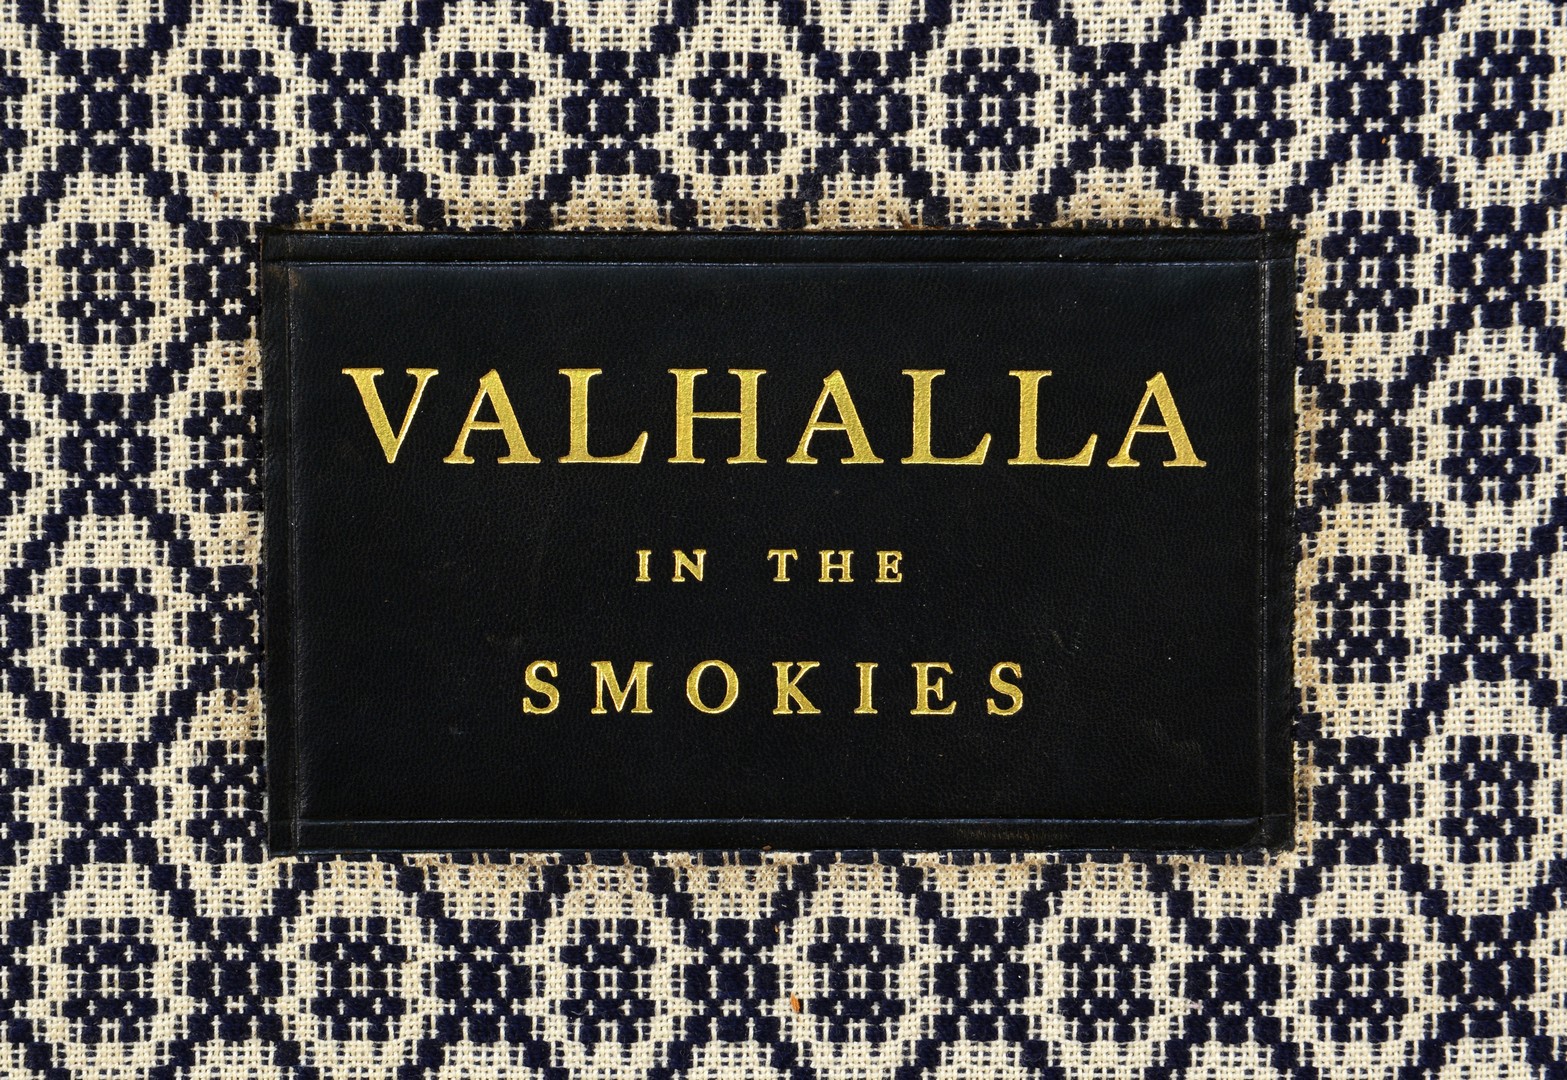 Lot 253: Valhalla in the Smokies, Maxwell/ Exline, 1938